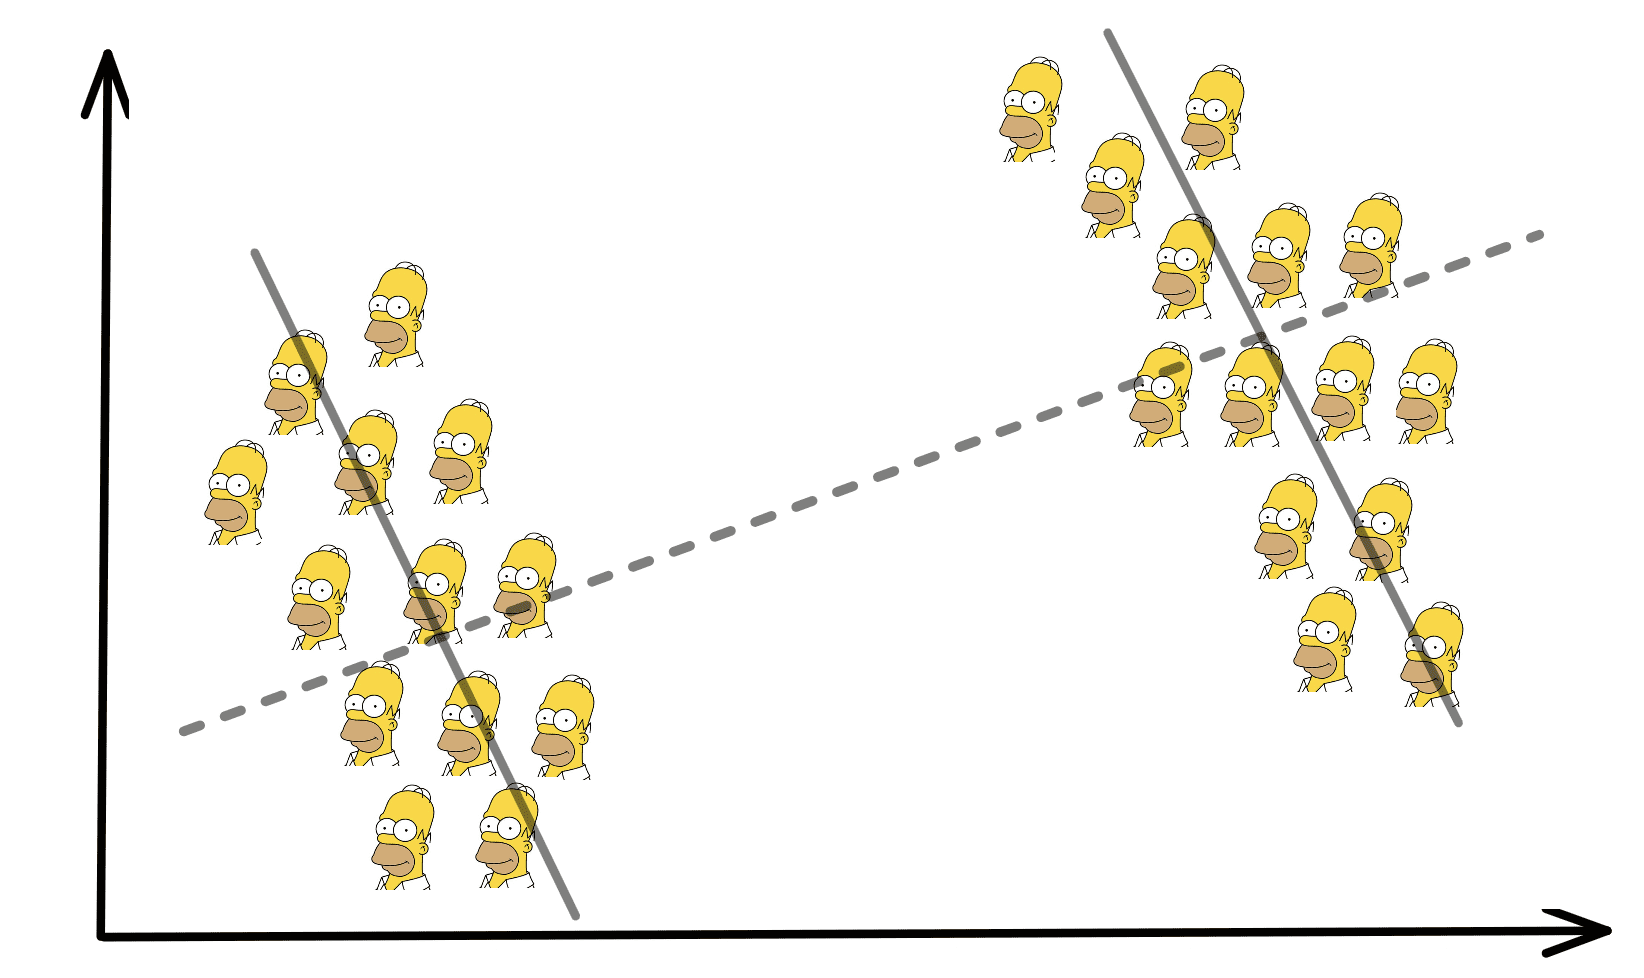 Simpson's Paradox and its Implications in Data Science